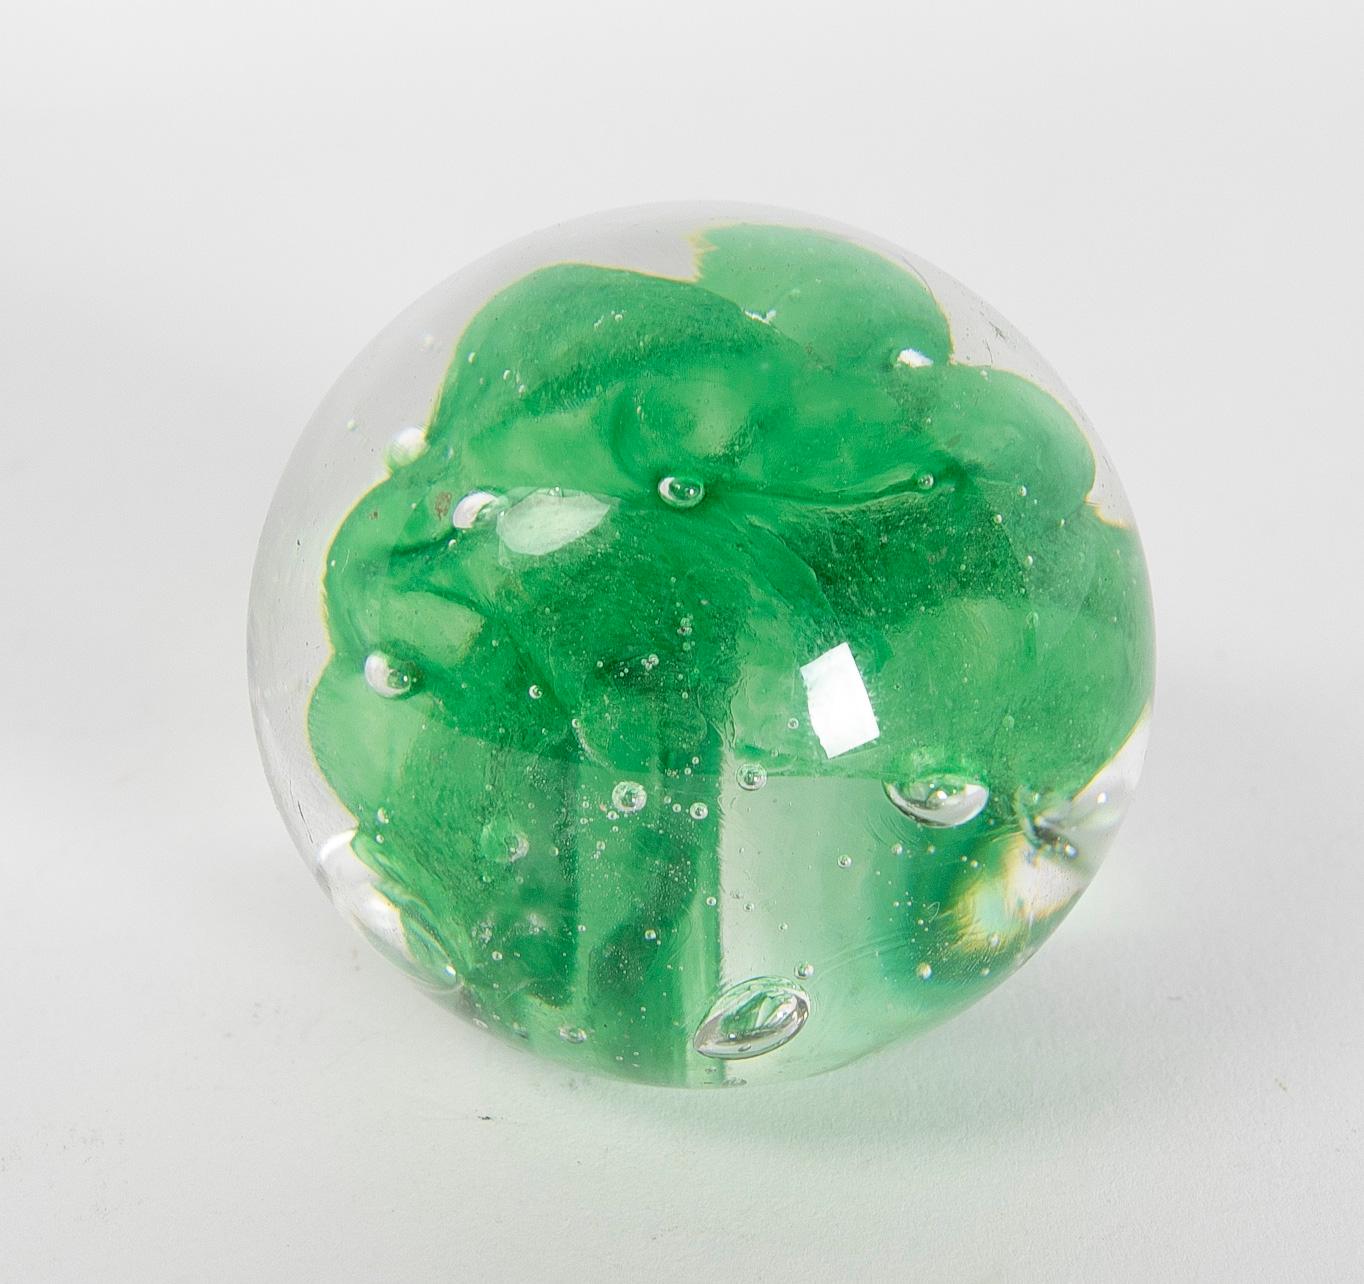 1930s Crystal Paperweight with Decoration inside with green color.